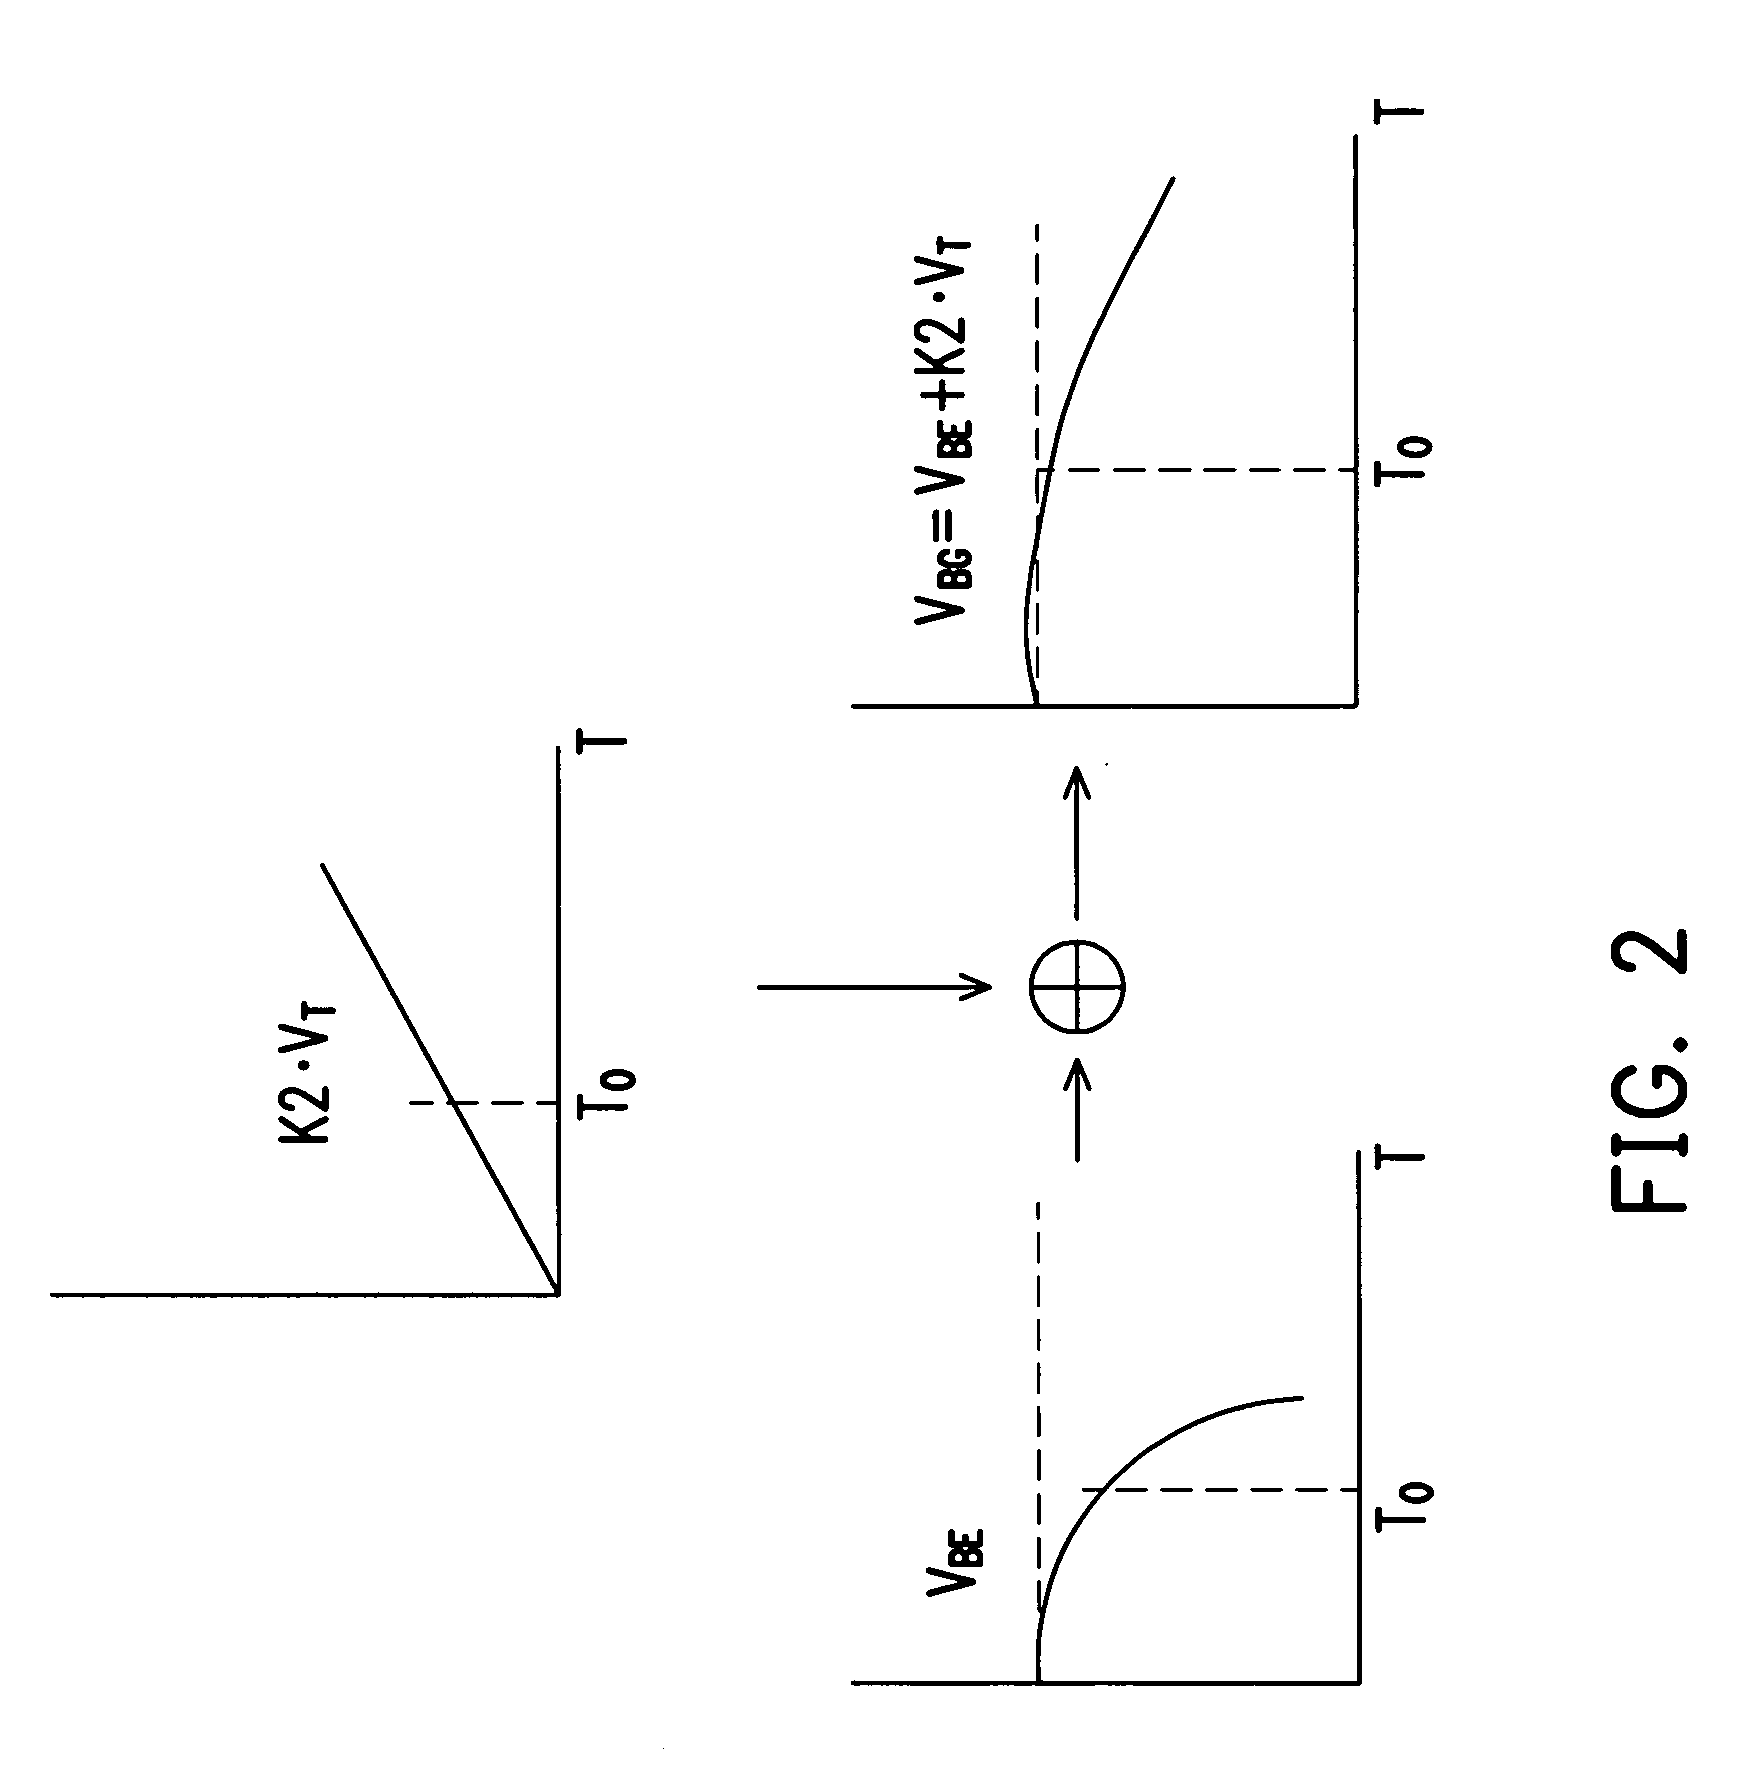 Non-linearity compensation circuit and bandgap reference circuit using the same